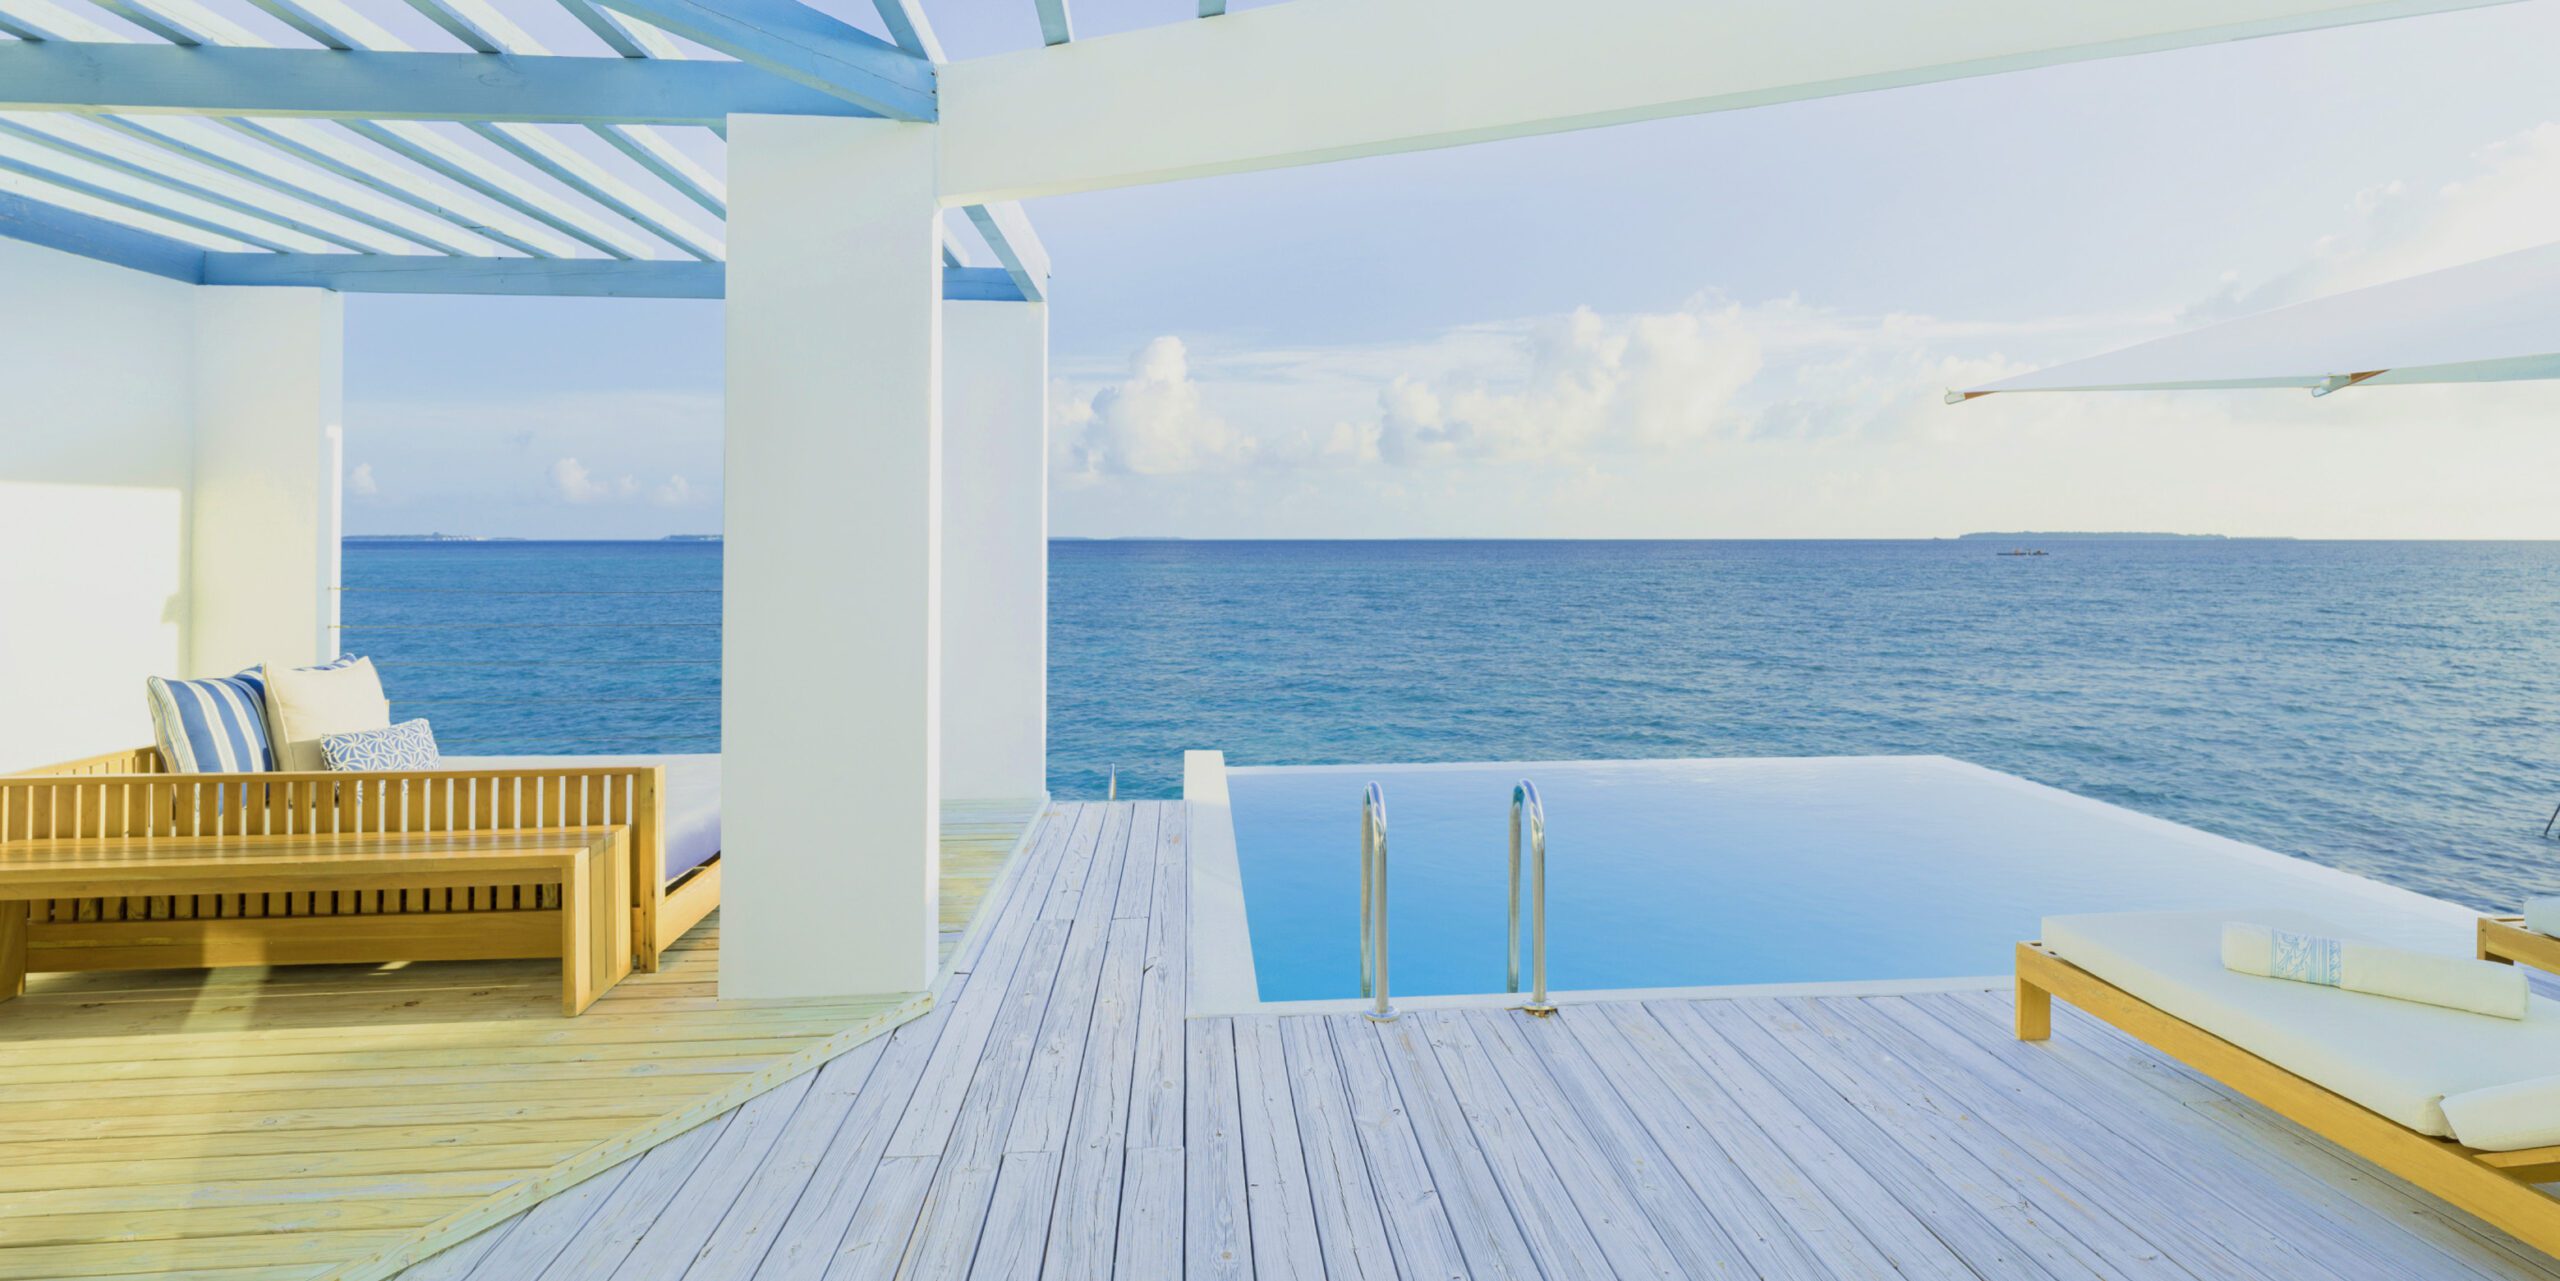 A Poolside View of our Luxury Villas in the Maldives